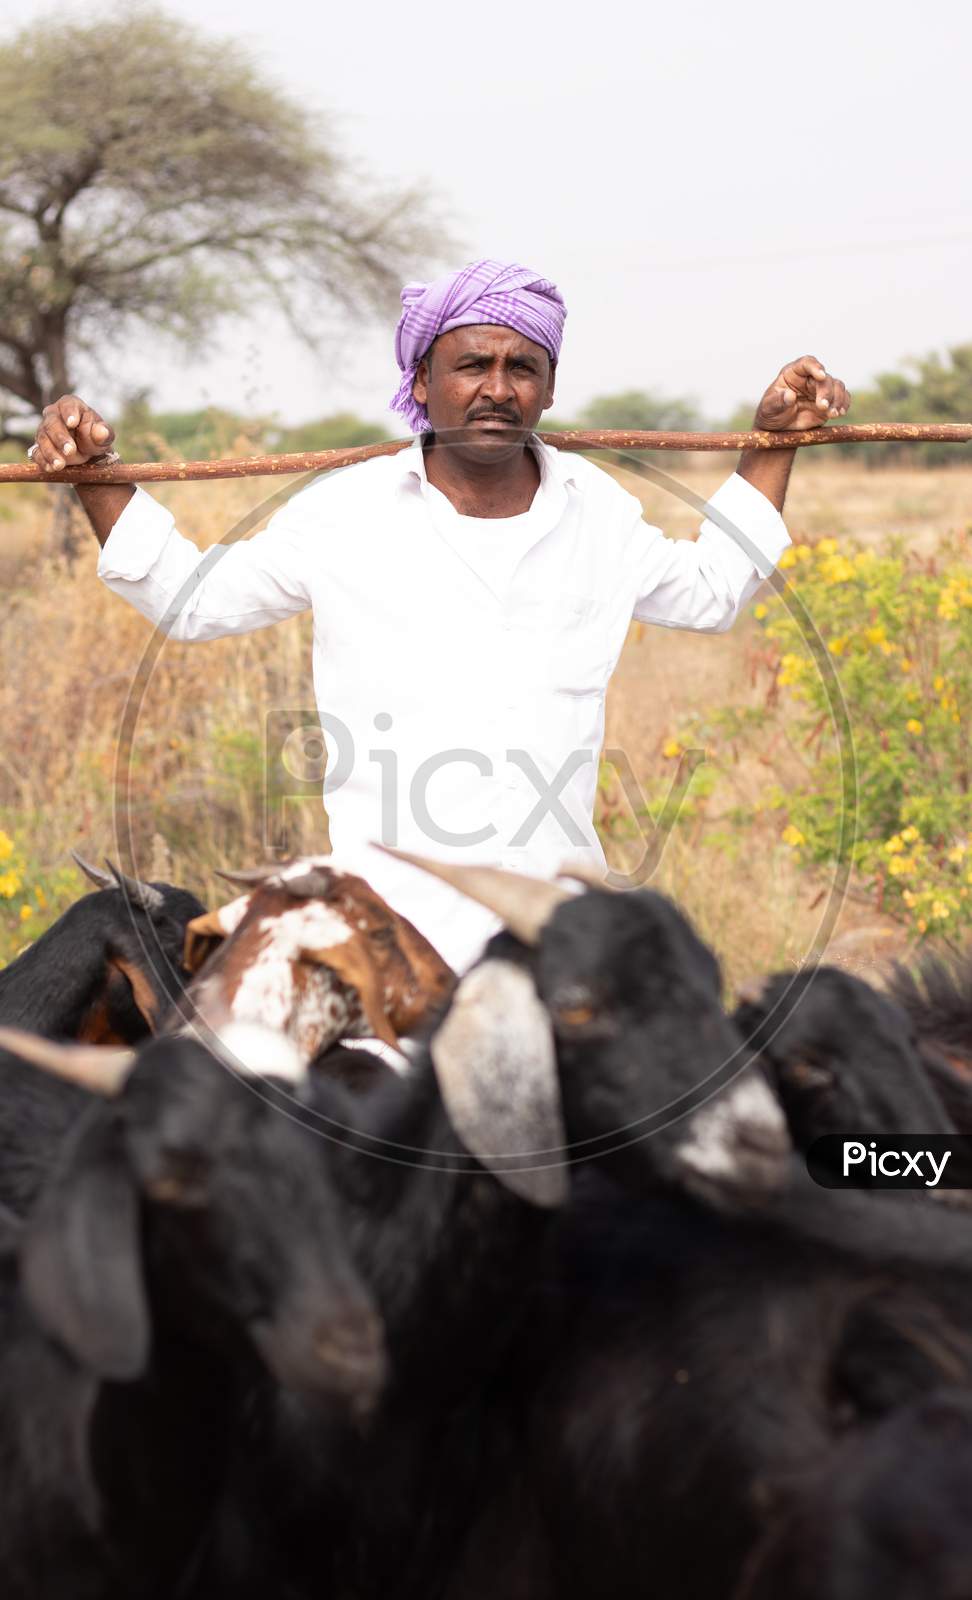 A herdsman with goats in a rural area